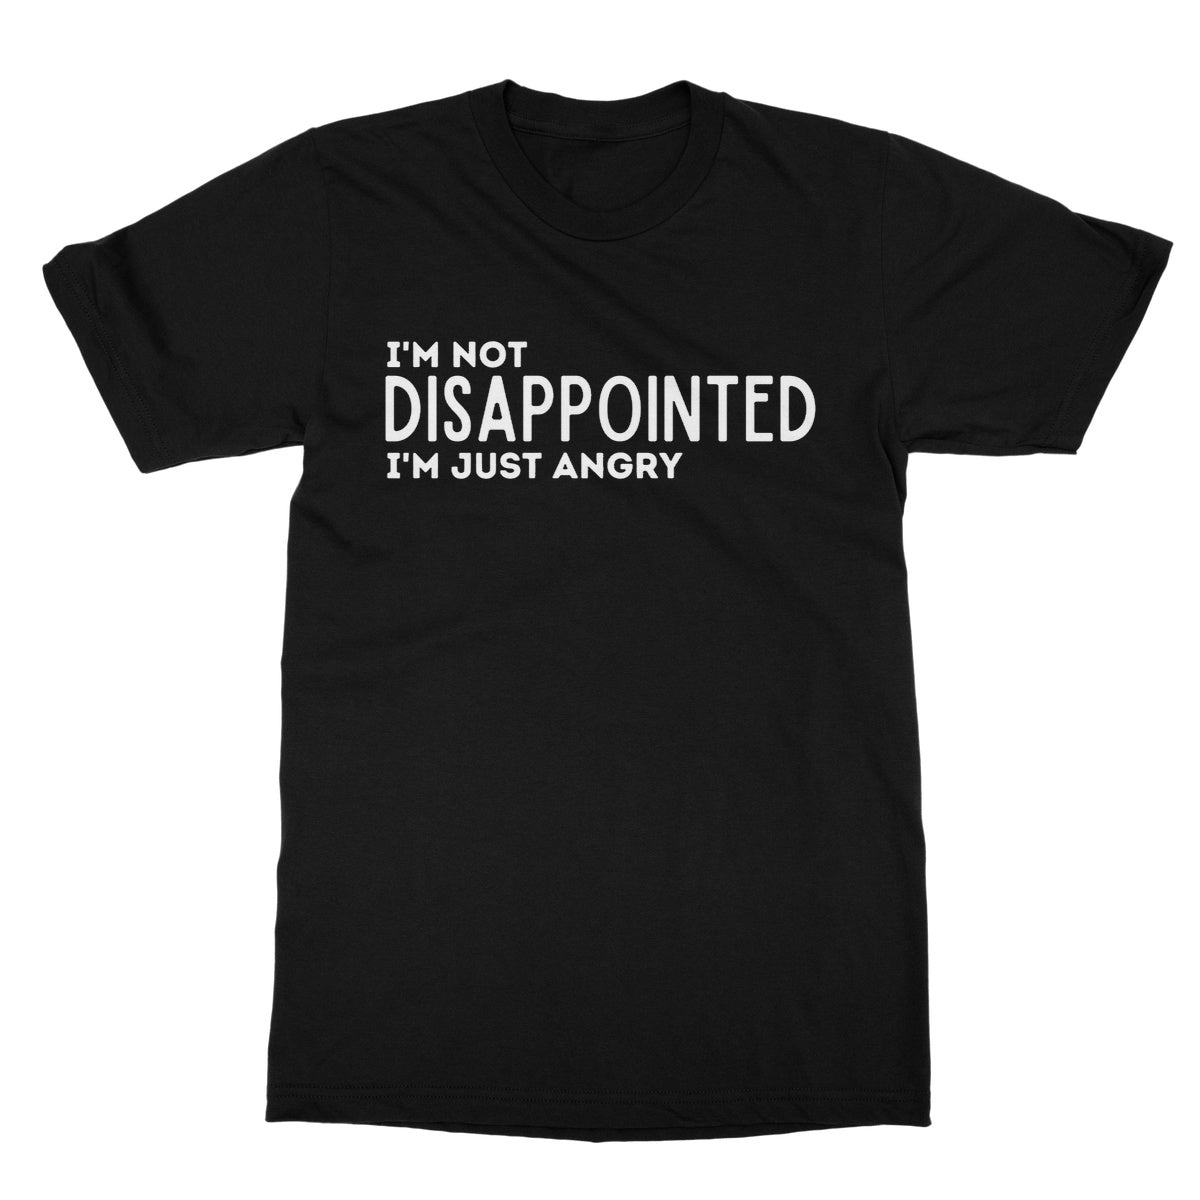 I'm not disappointed I'm just angry t shirt black